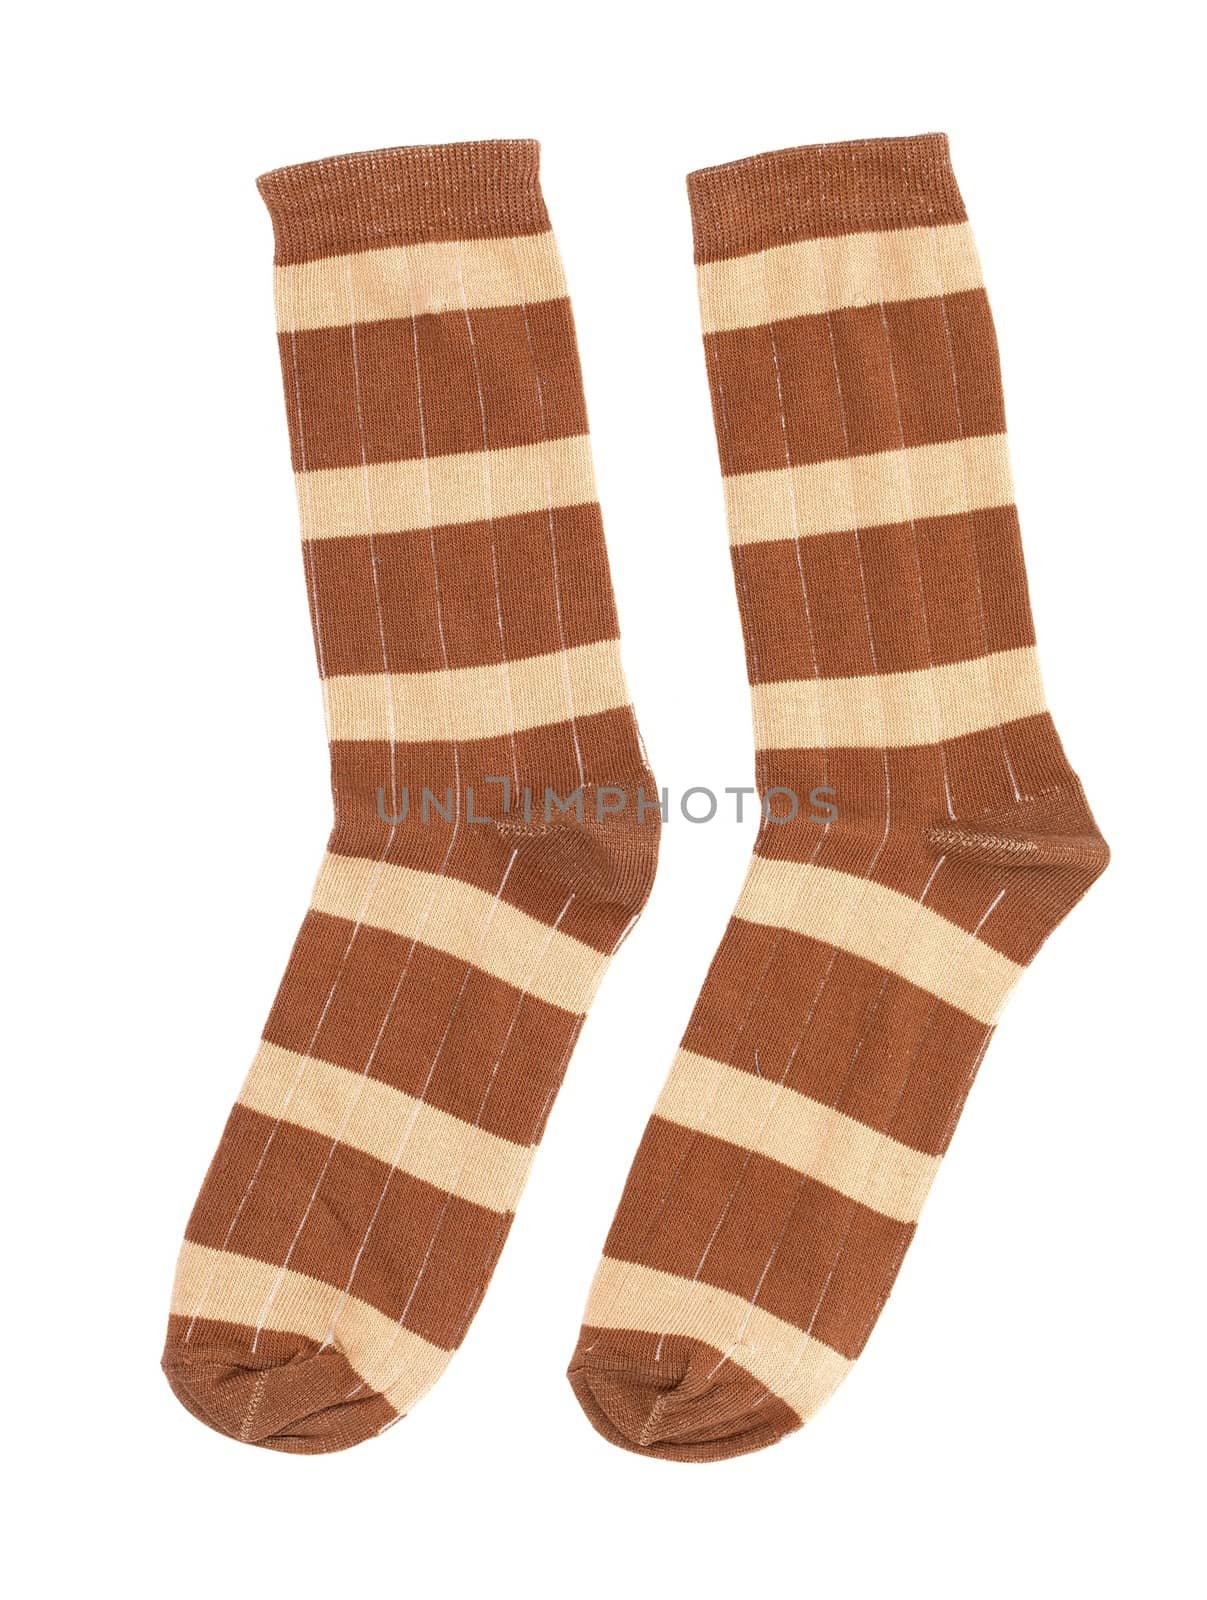 A pair of socks isolated on white background